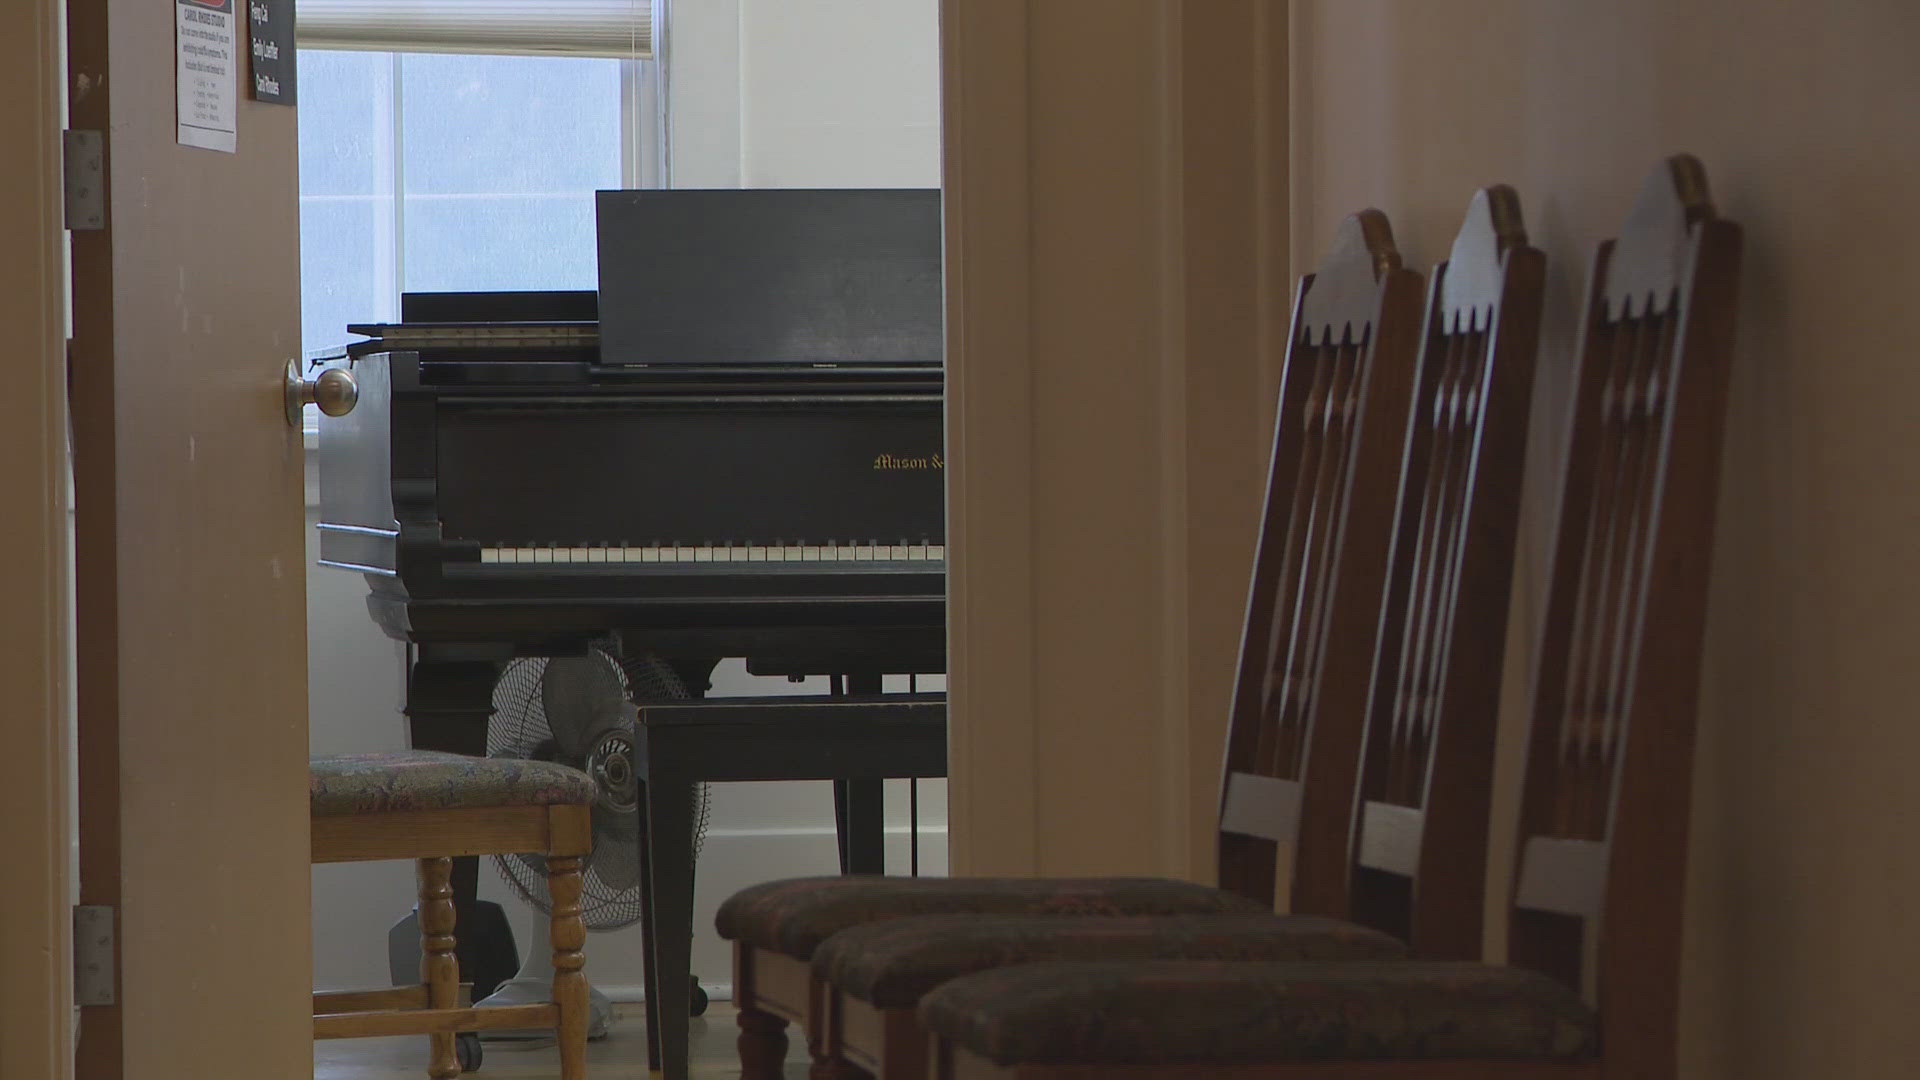 The Holy Names Music Center is holding a fundraiser to find a new place to play music.